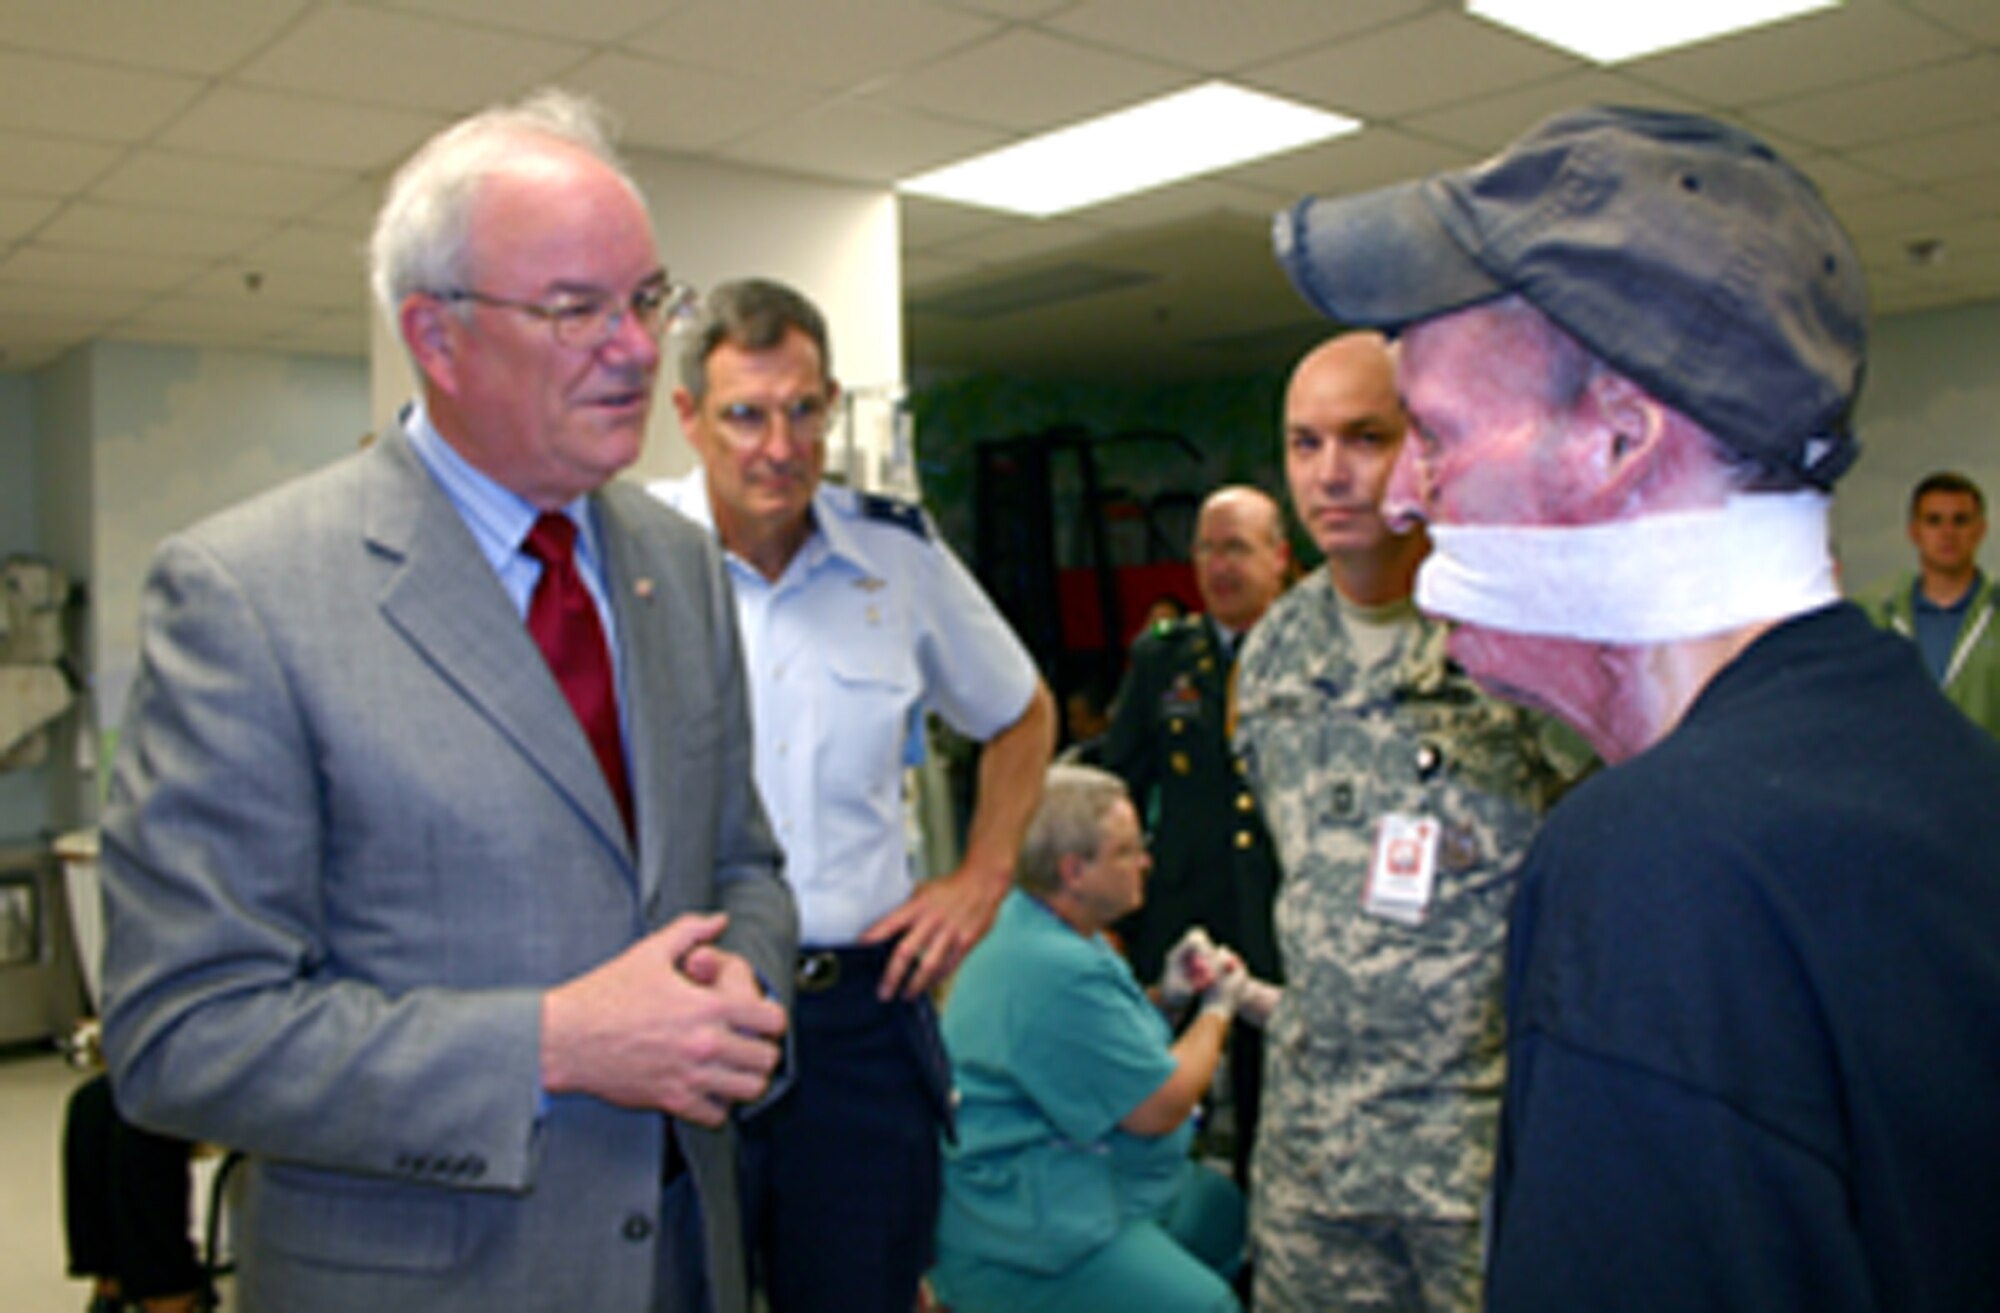 (From left) Secretary of the Air Force Michael W. Wynne, Brig. Gen. (Dr.) David G. Young III and Army Master Sgt. Ben Martin visit with Staff Sgt. Israel Del Toro Jr. at Brooke Army Medical Center in San Antonio on Thursday, June 1, 2006. Sergeant Del Toro, a tactical air control party operator, was injured in combat in December 2004 while supporting Operation Enduring Freedom in Afghanistan. Secretary Wynne was in San Antonio visiting various military installations and training sites. General Young is commander of the 59th Medical Wing at Lackland Air Force Base and Sergeant Martin is assigned to BAMC. (U.S. Air Force photo/2nd Lt. David Herndon)